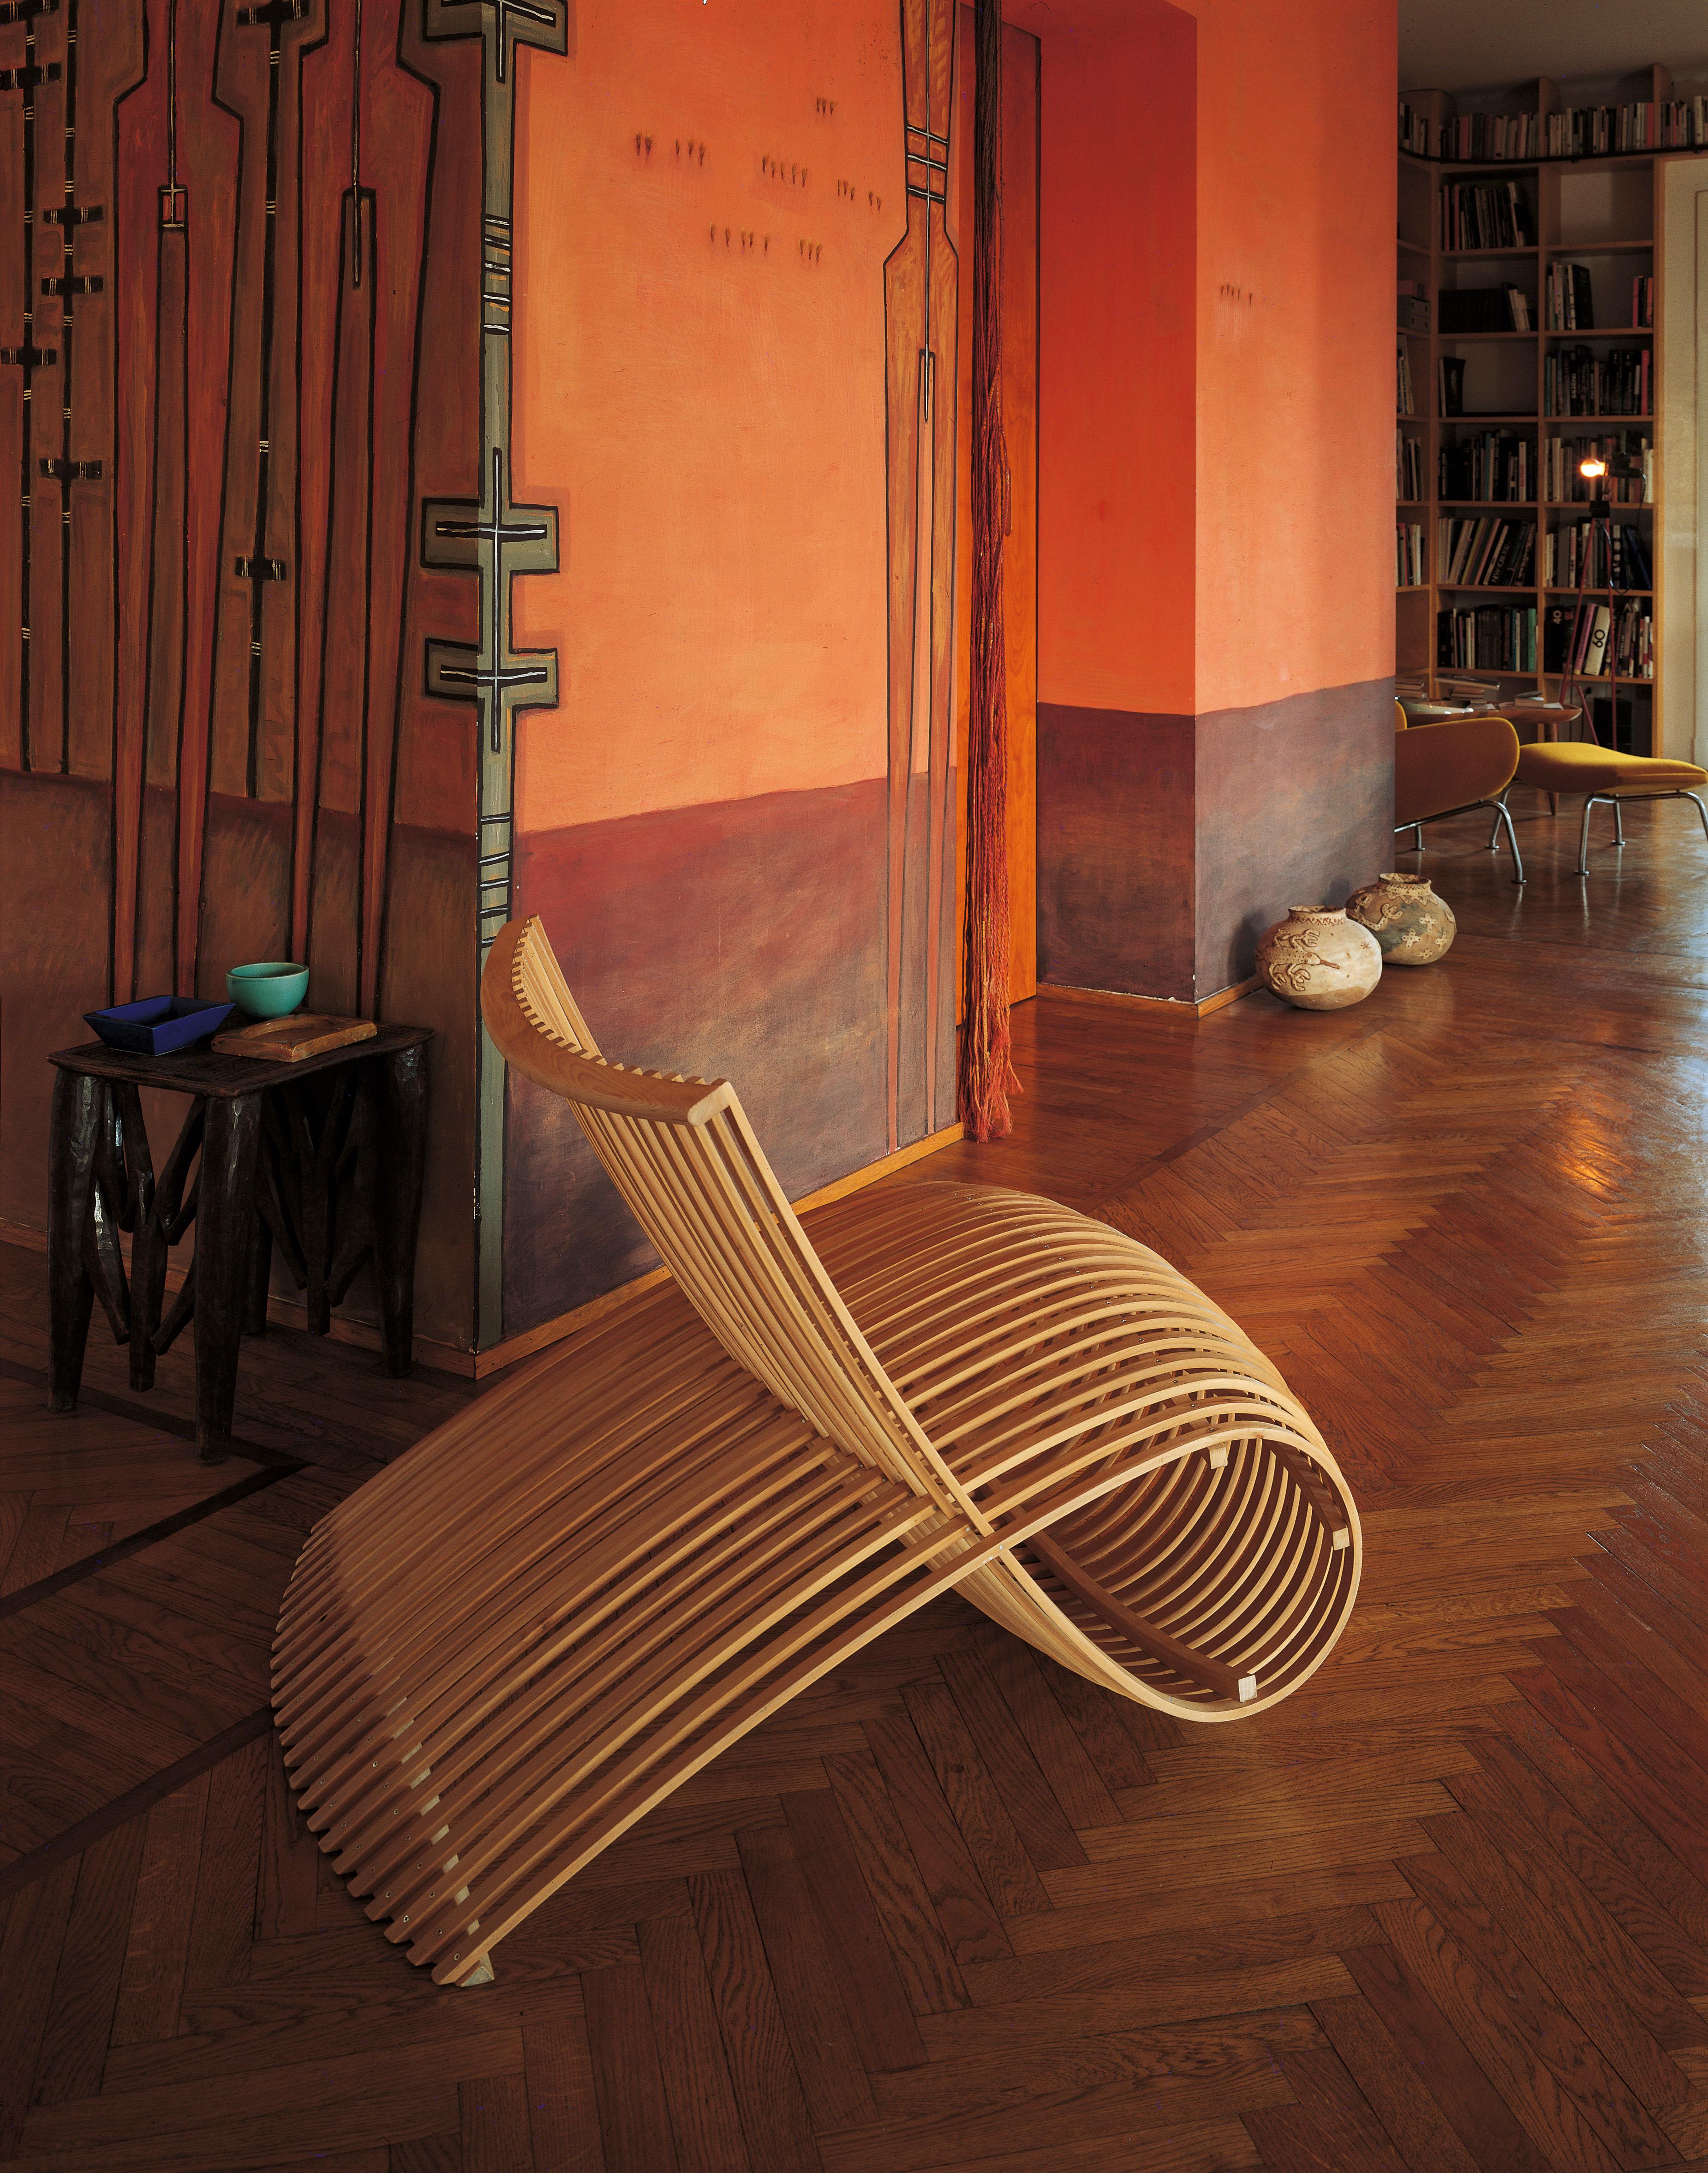 Successful proof of great experimentation and daring, the wooden chair by Marc Newson was born of the desire to push the manipulation of wood to its limits. Wooden chair is a modern, innovative seat, yet it is also warm, cozy and comfortable. The